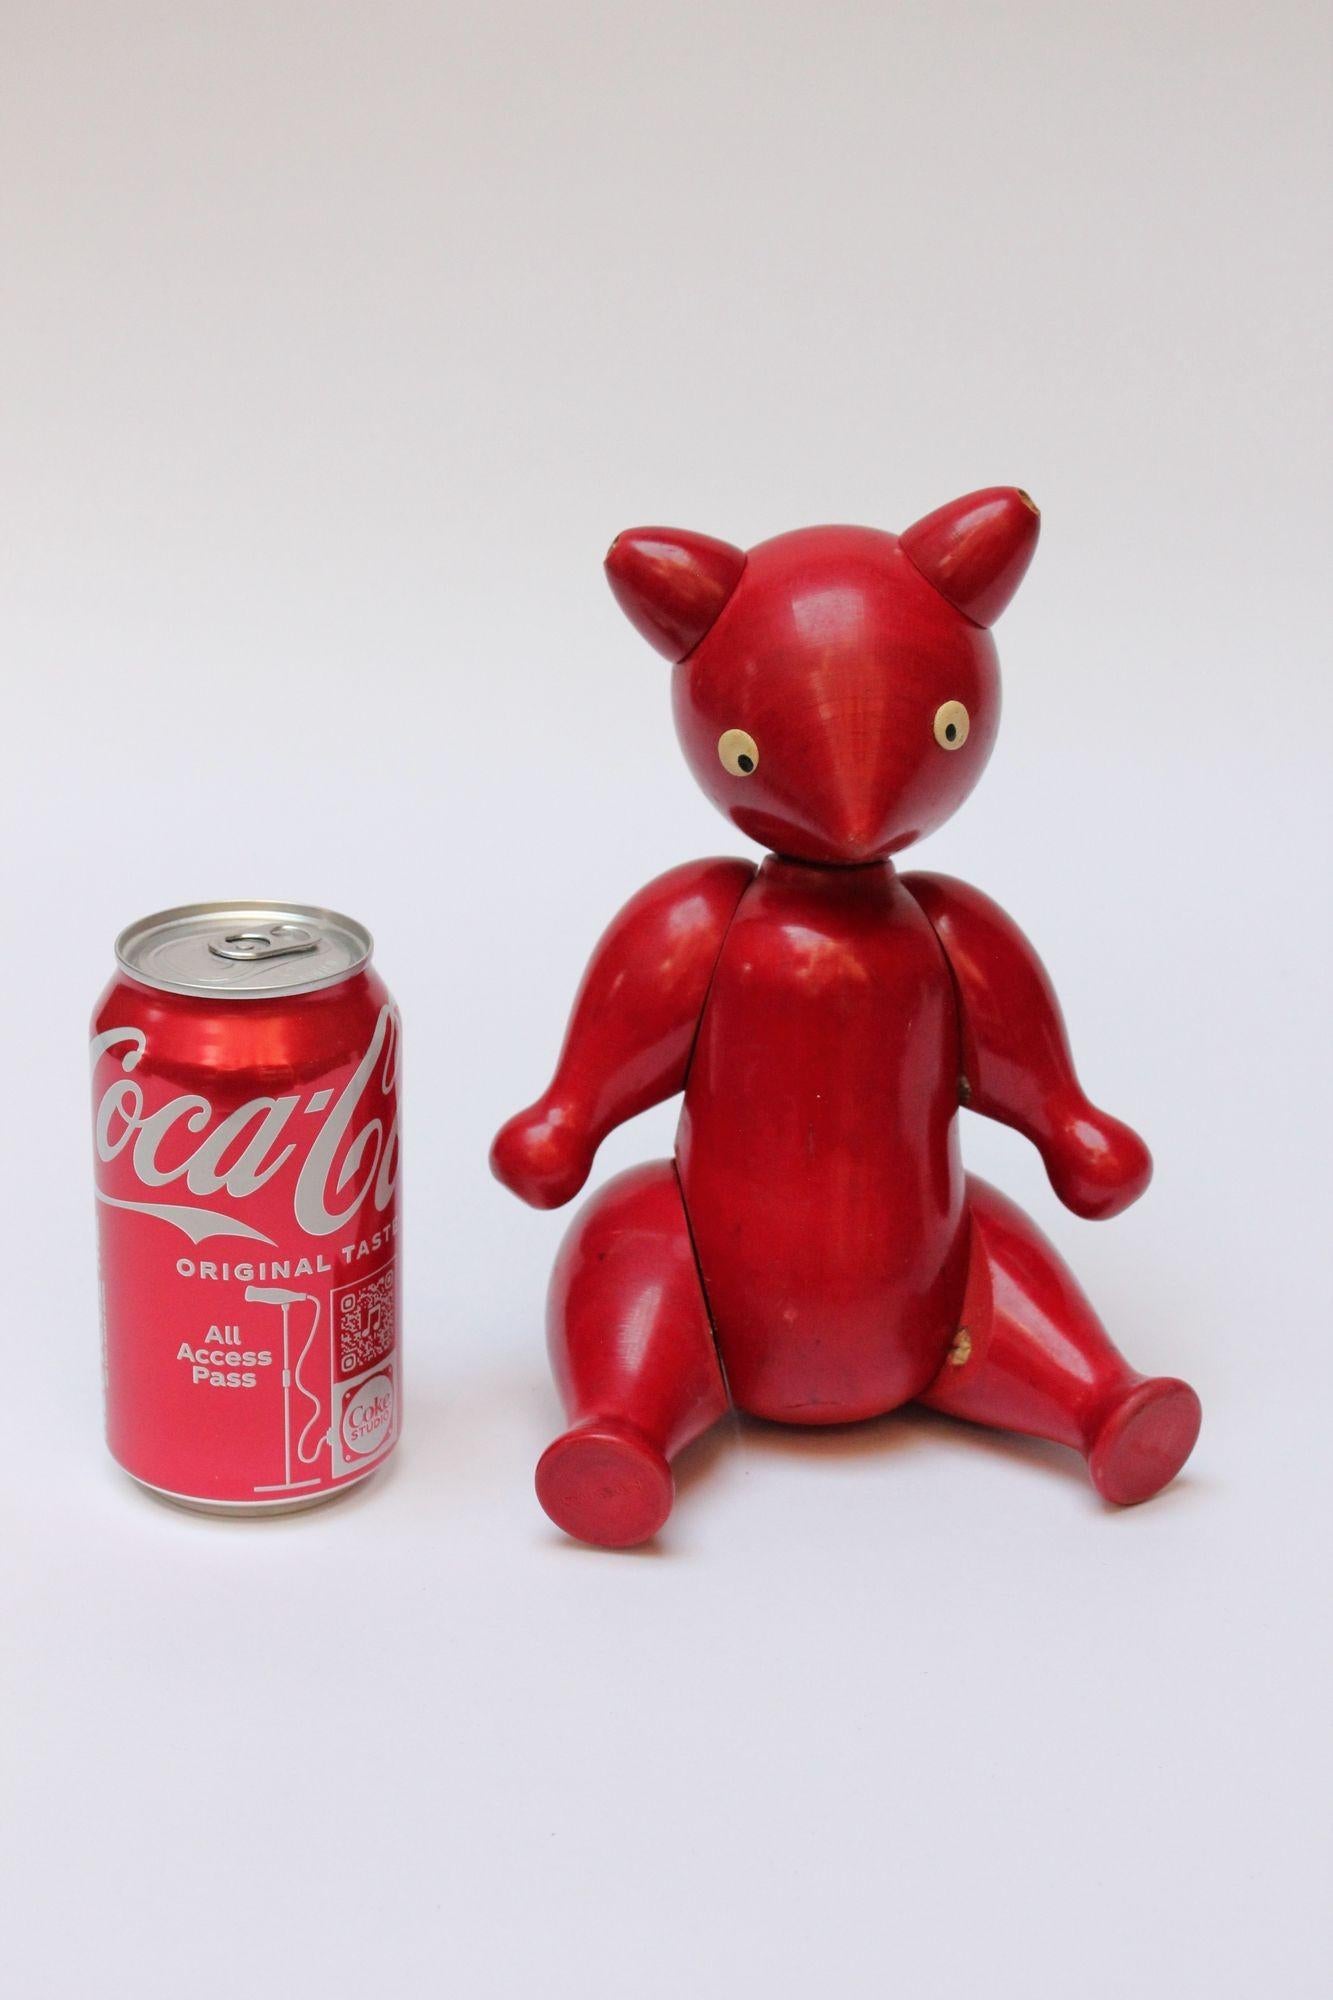 Striking red maple bear figurine with hand-painted and applied details (ca. 1950, Italy). Interior elastic and stuffing allow for articulation of limbs. Bear cannot stand on its own but can sit upright. Bold, vibrant decorative object pairing well